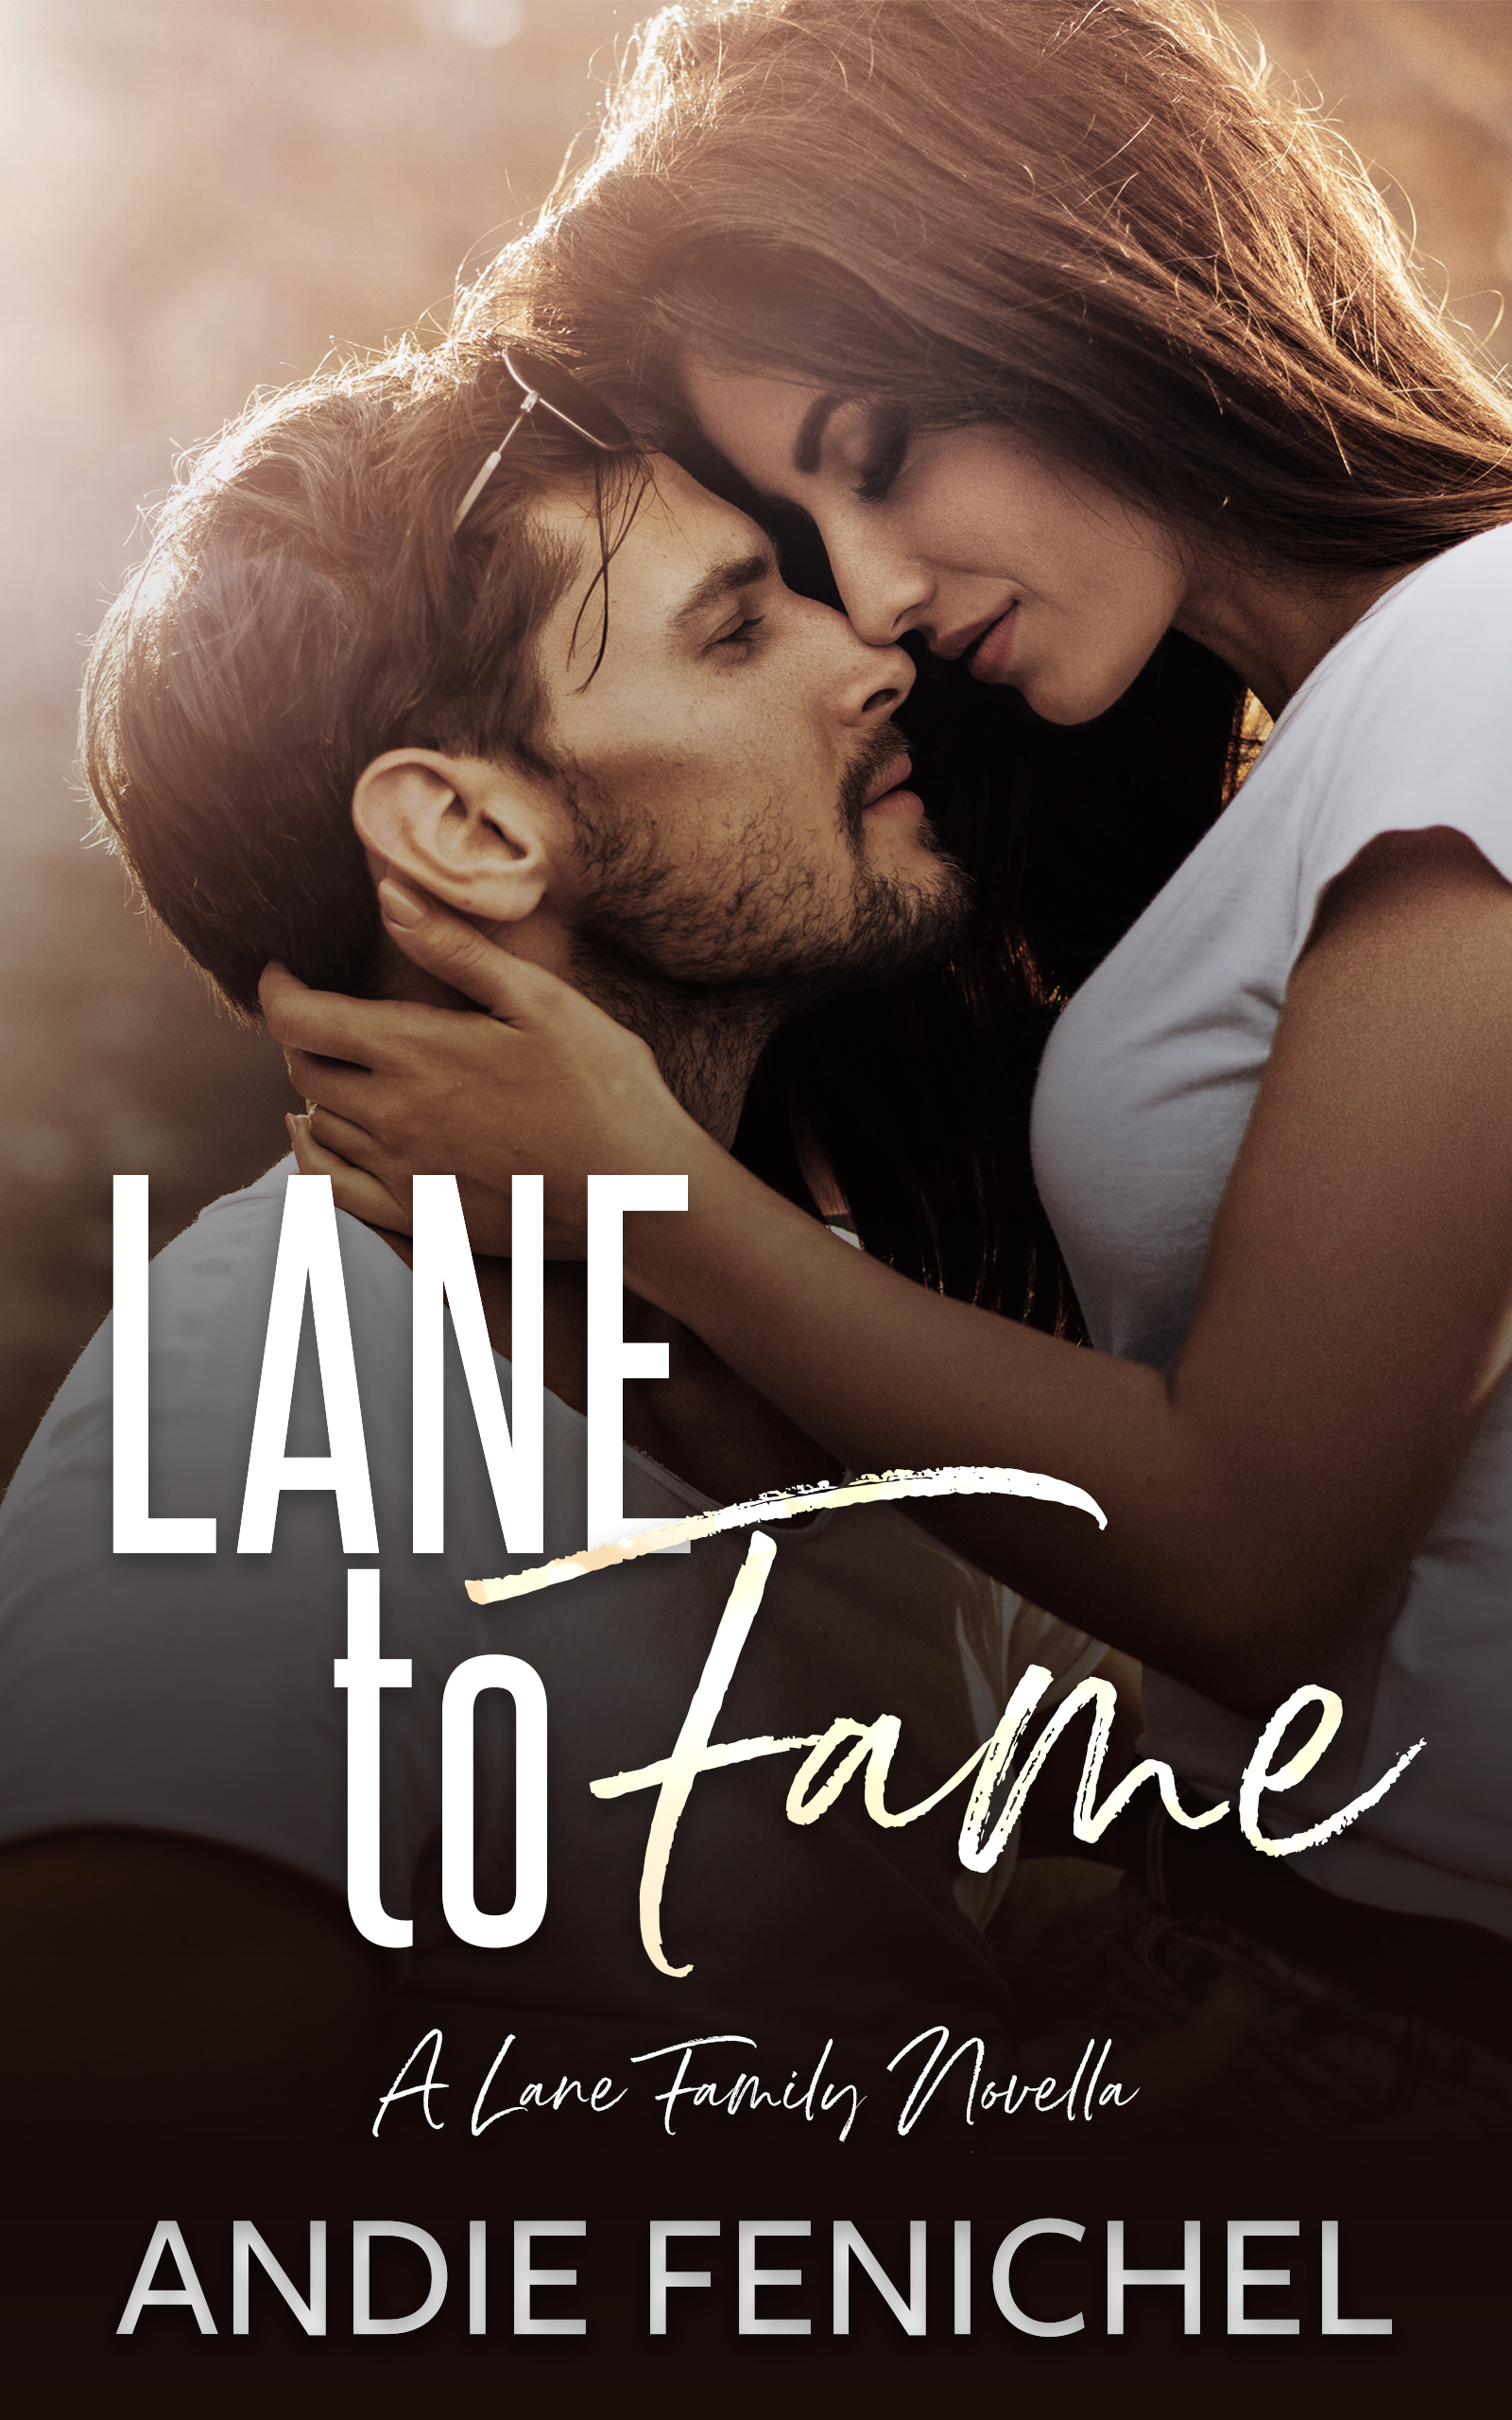 Lane to Fame by Andie Fenichel